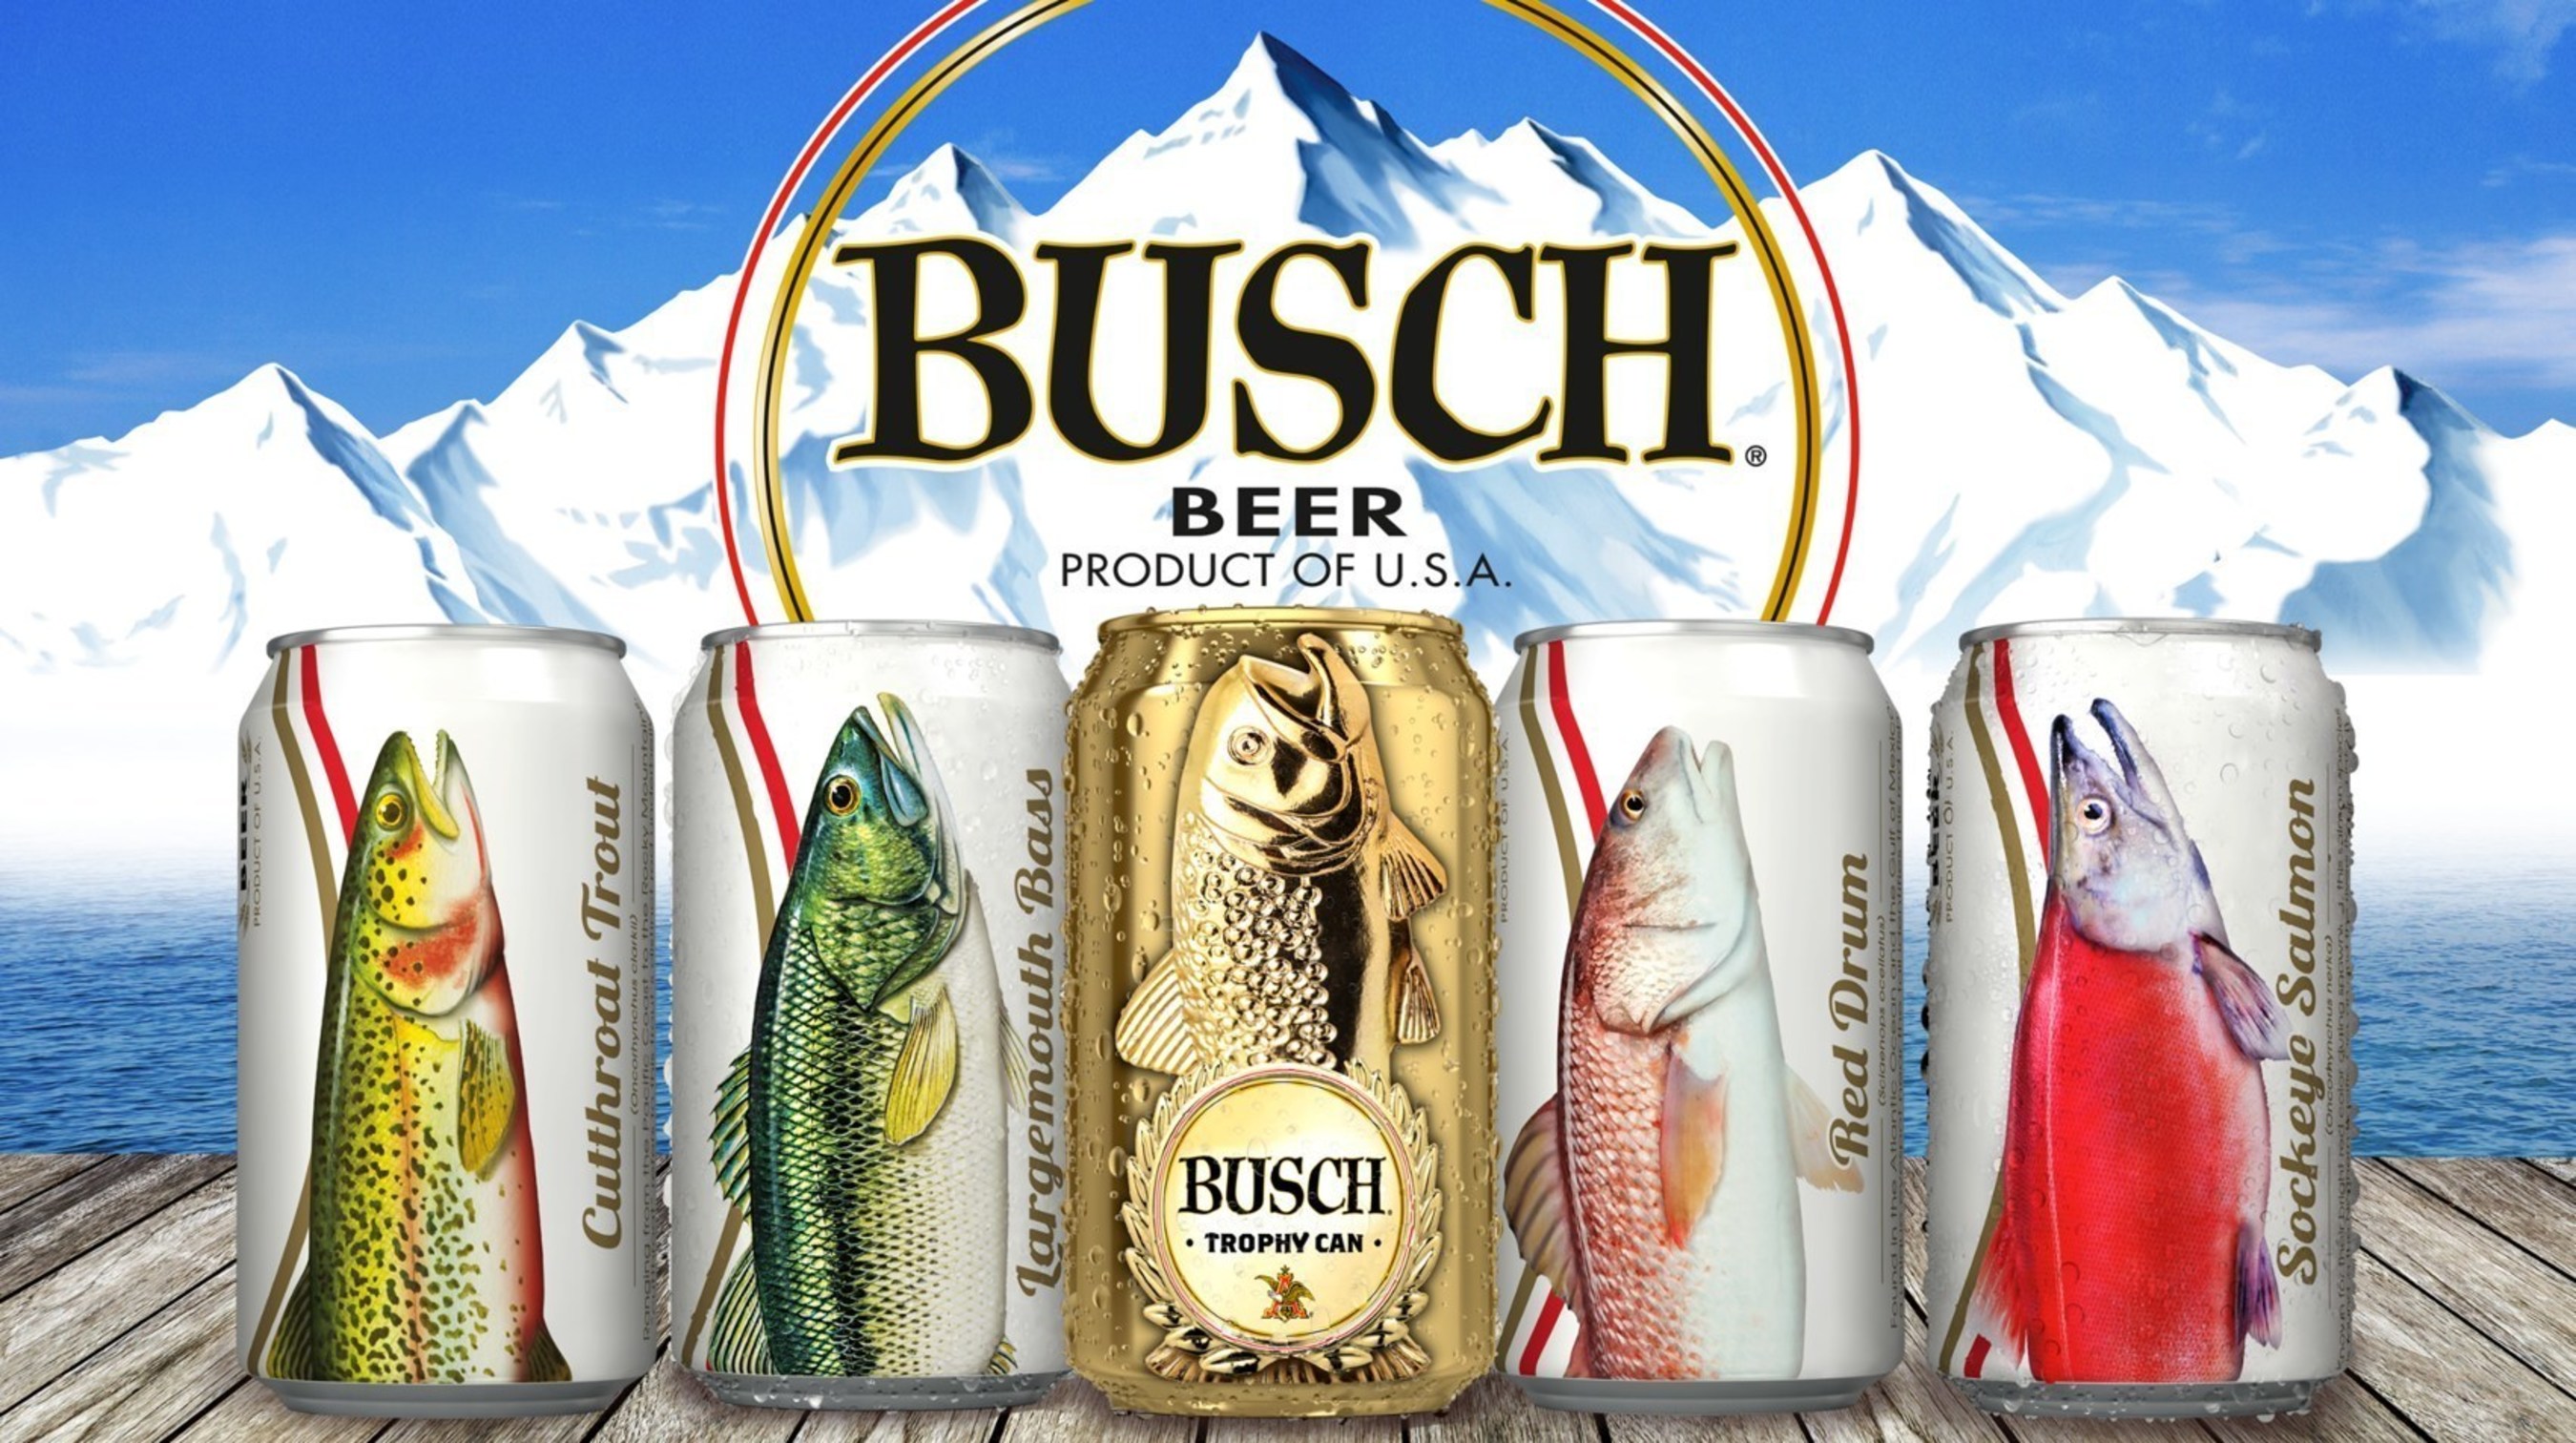 Busch beer's popular fishing promotion is back with a new twist, giving consumers the chance to win the ultimate fishing getaway with pro fisherman and seven time Angler of the Year, Kevin VanDam. Consumers who find one of the 100,000 gold trophy cans randomly seeded in packs of Busch and Busch Light can capture a photo of themselves with the can and submit it online via Busch.com.